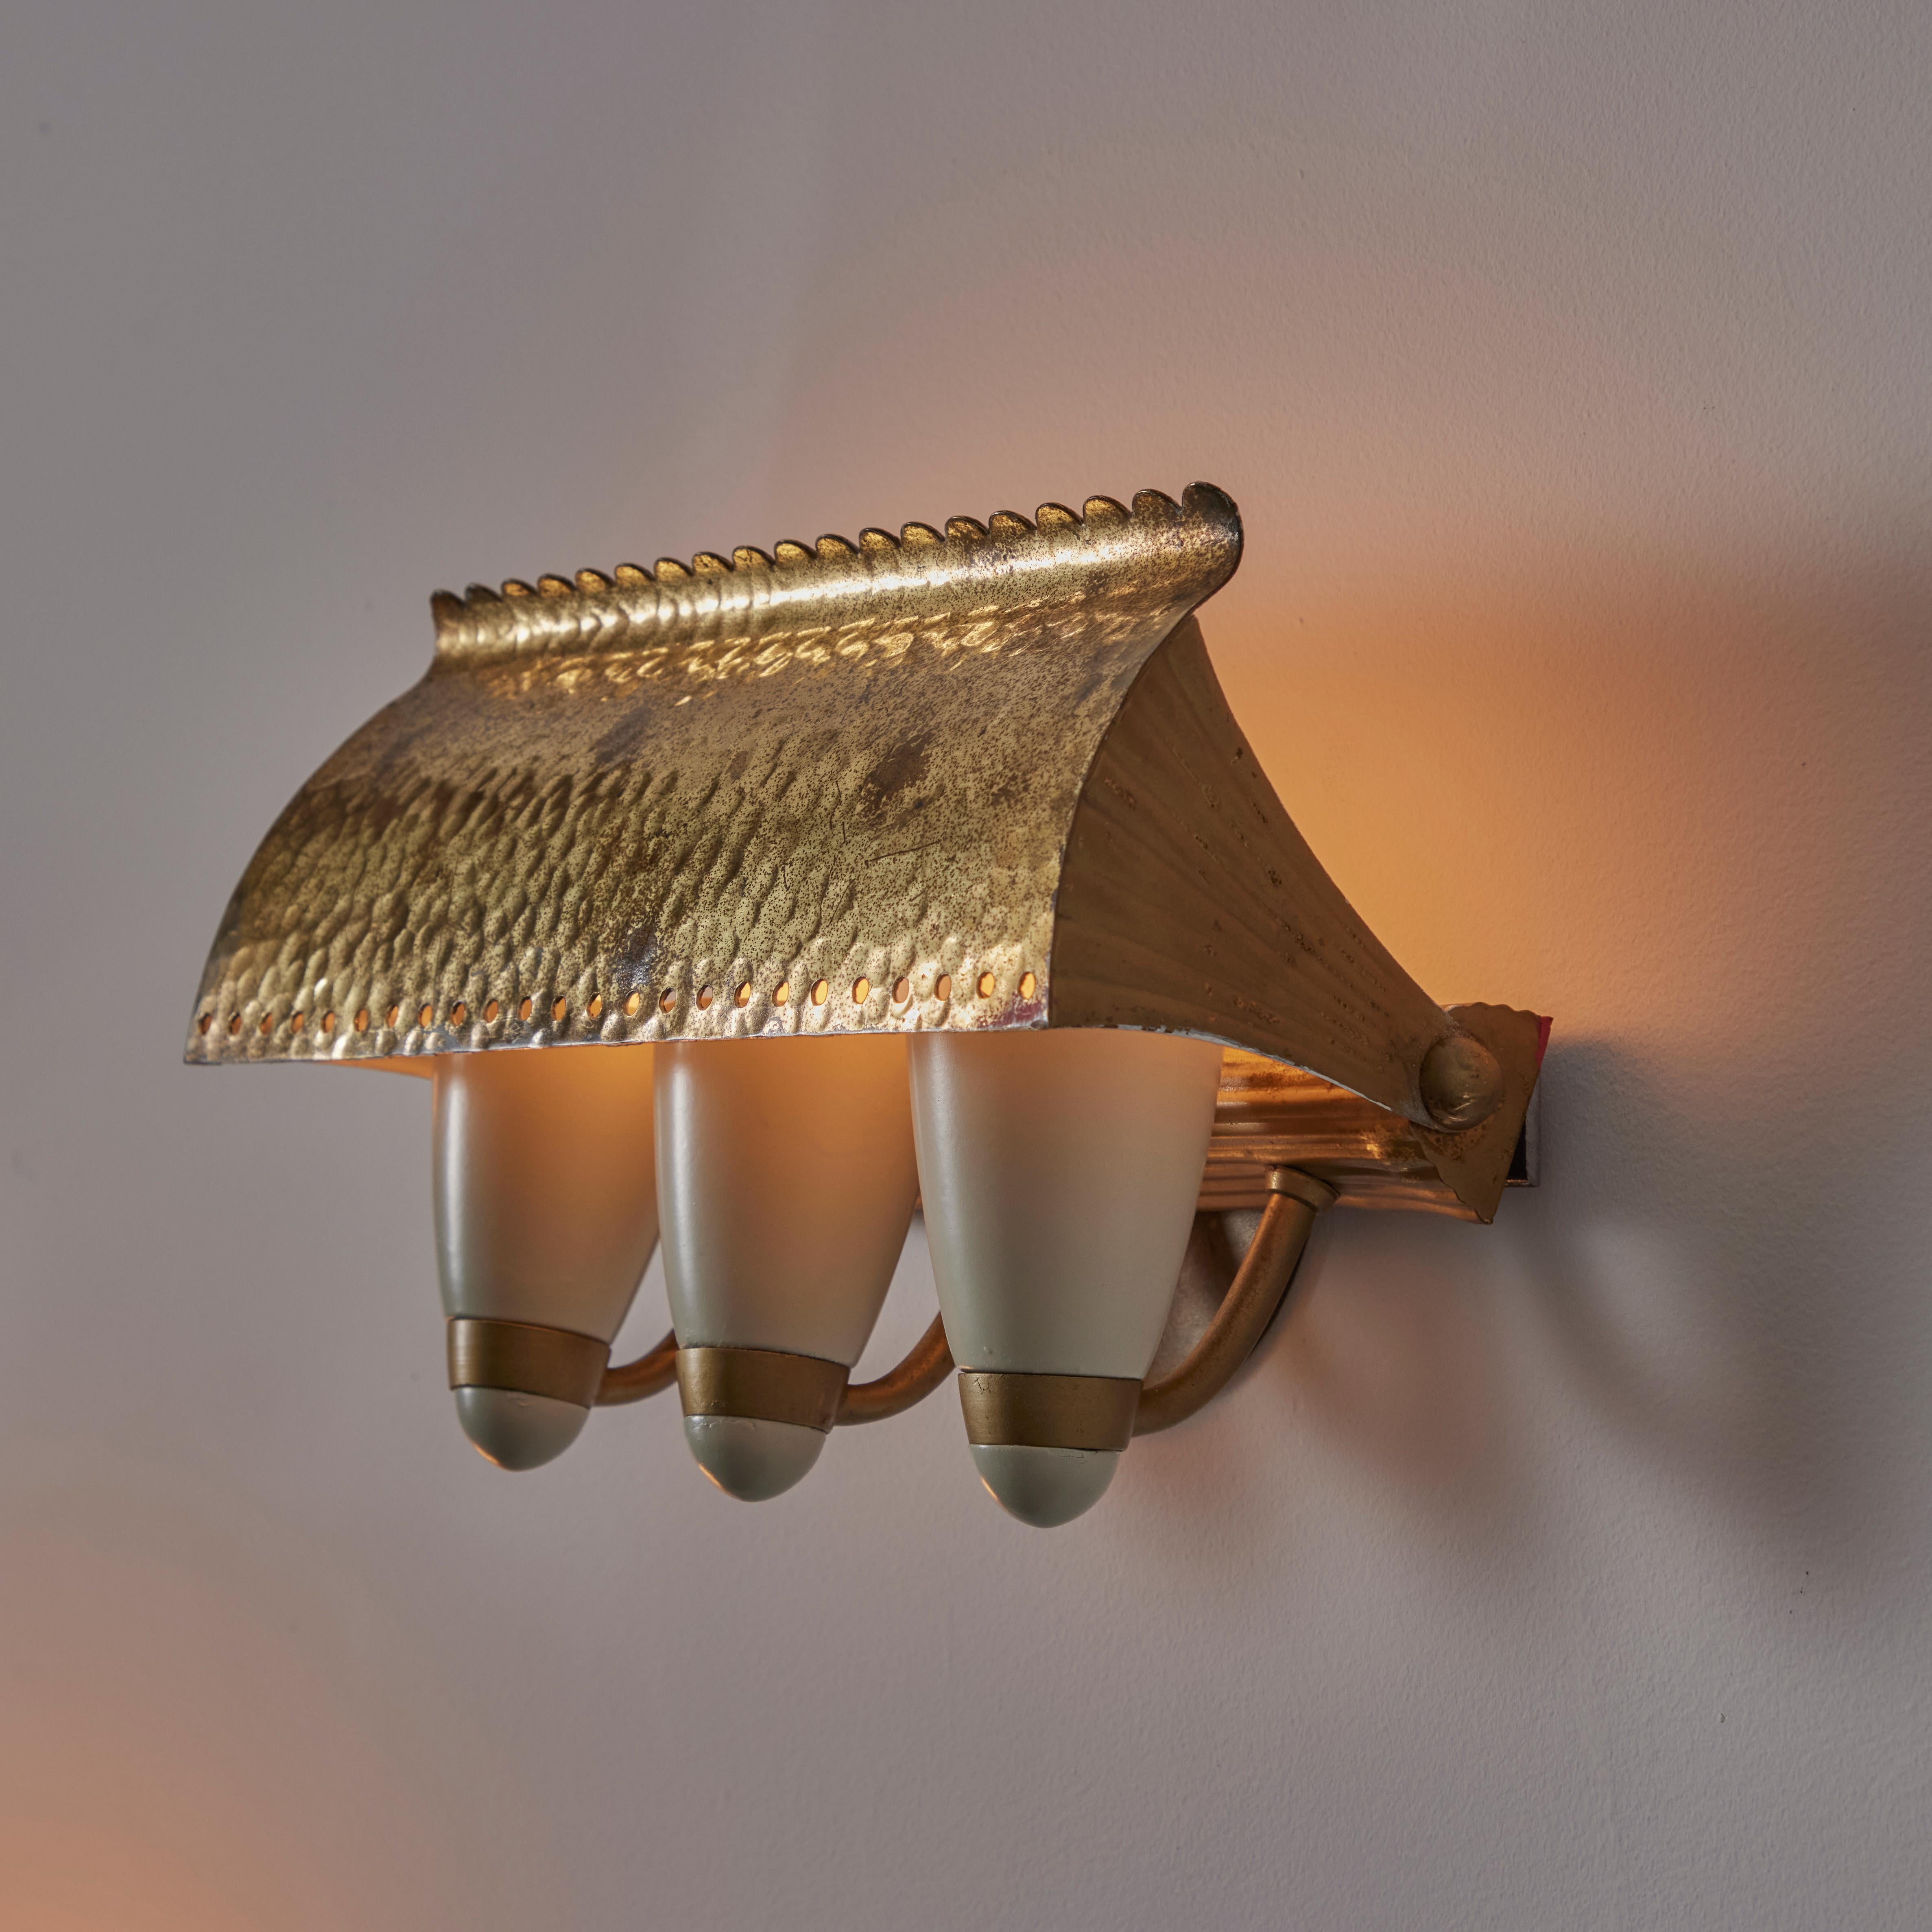 Custom sconces by G.C.M.E. Designed and manufactured in Italy, circa the 1940s. Three cone shaped lights are masked by a beautiful scallop lipped shade. The shade can pivot up and down, allowing the user to play with light direction and exposure of